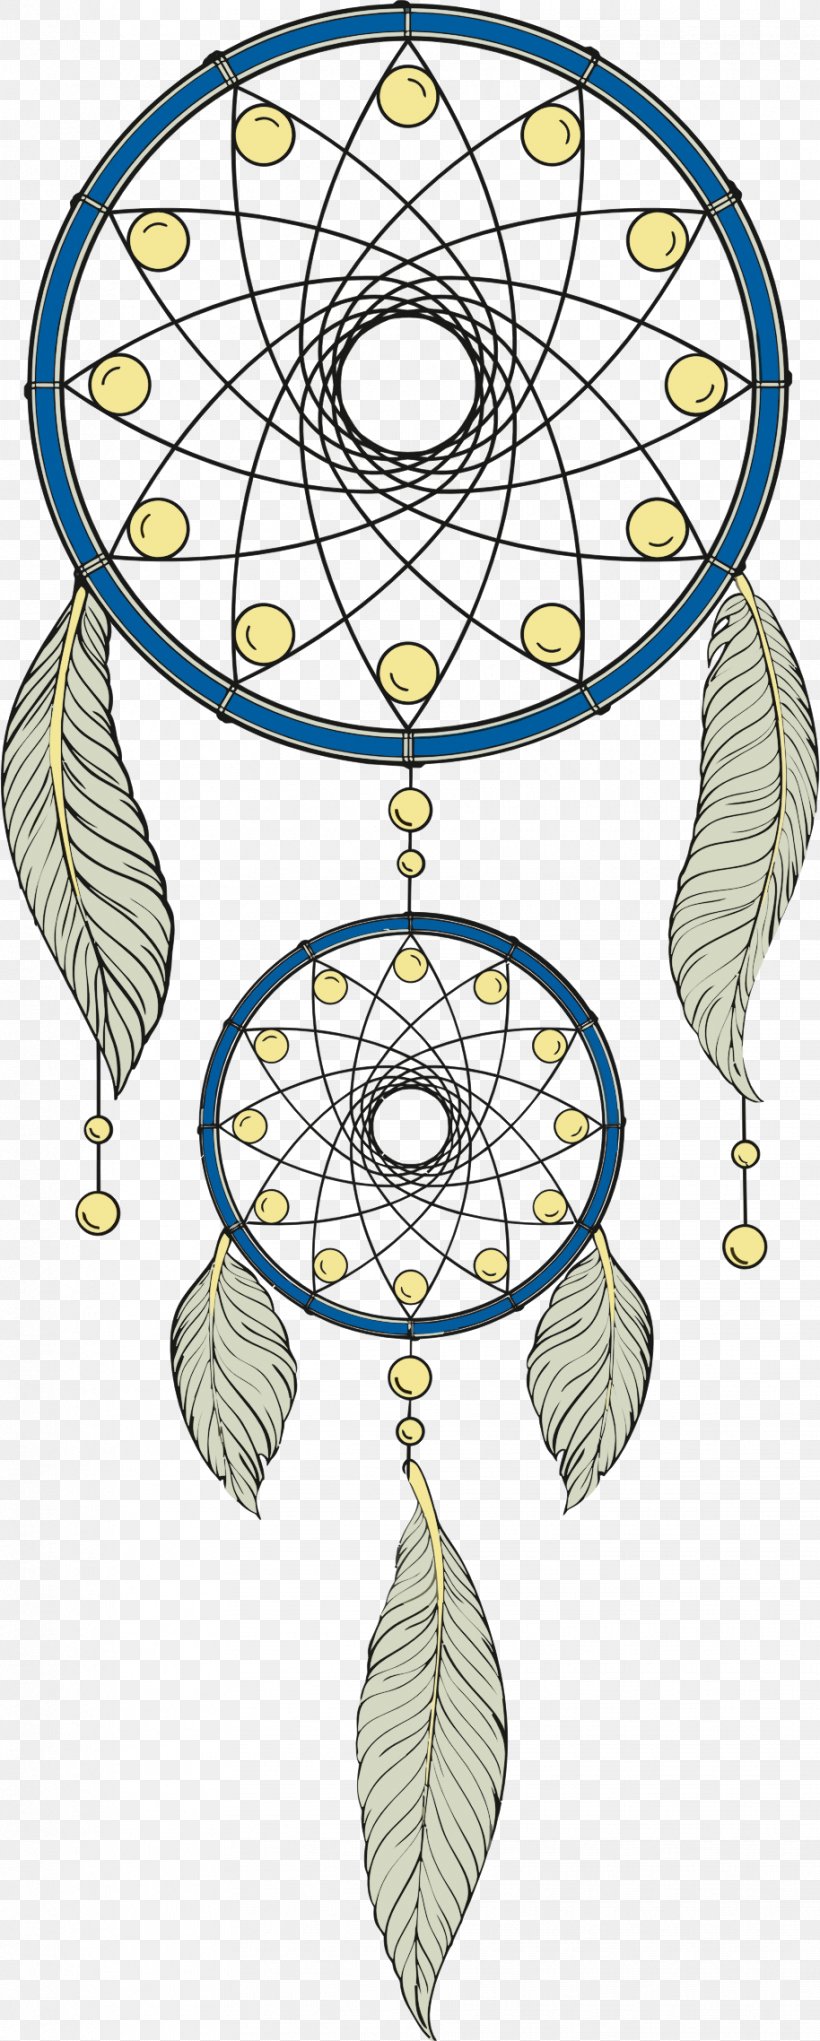 Dreamcatcher Indigenous Peoples Of The Americas Native Americans In The United States Clip Art, PNG, 914x2276px, Dreamcatcher, Americans, Area, Art, Artwork Download Free